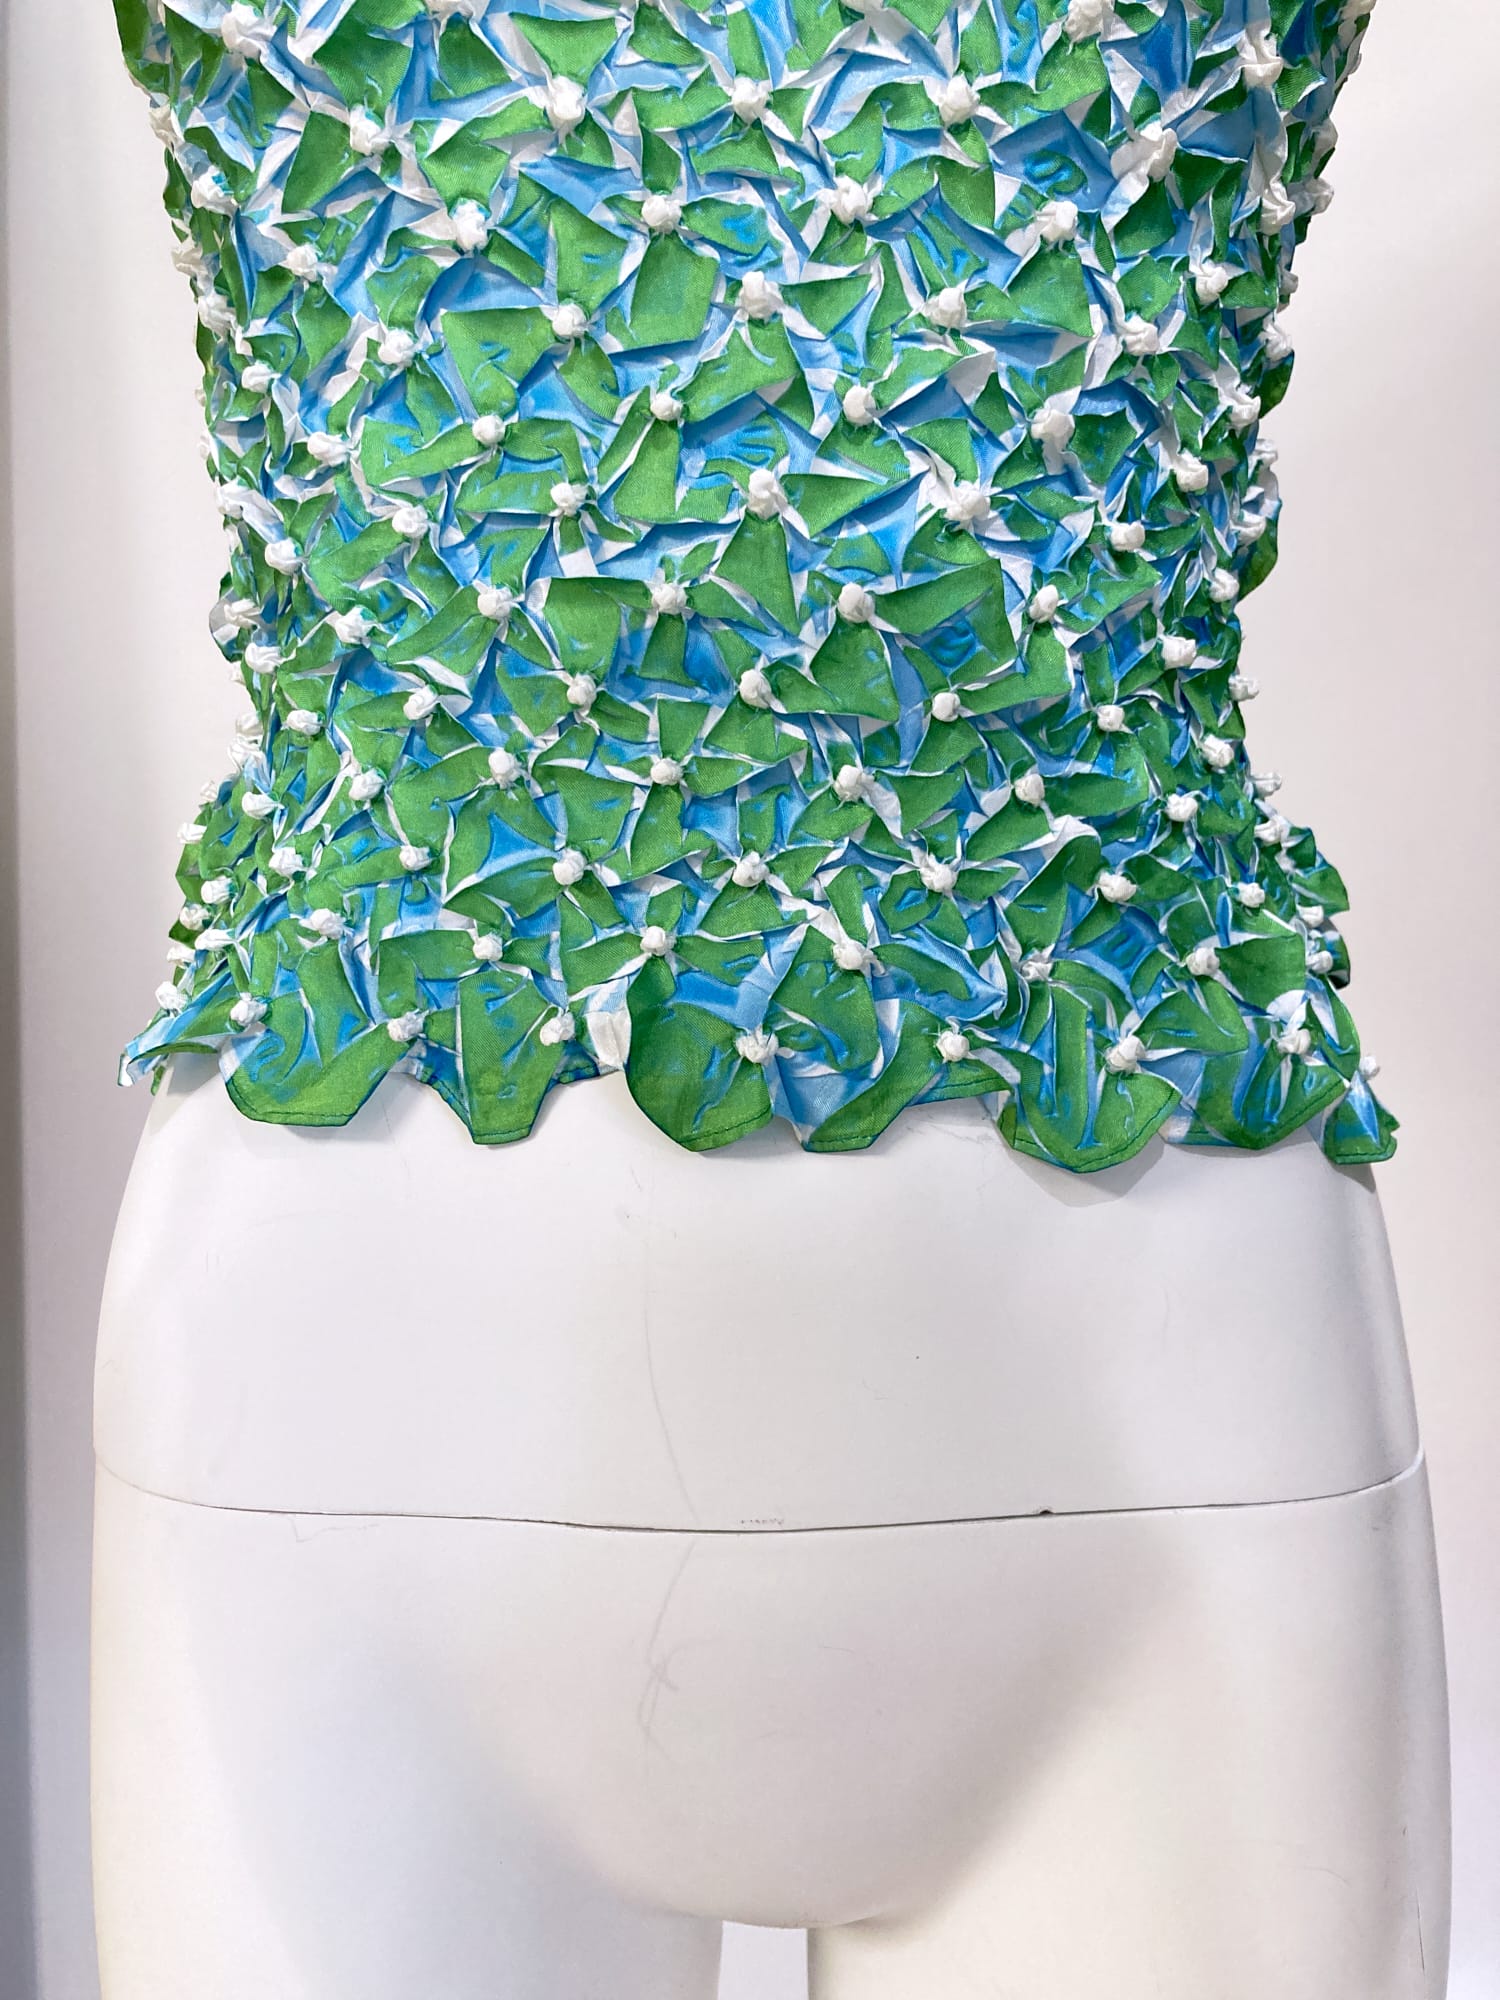 Wrinqle Inoue Pleats green blue wrinkled polyester 3D high neck top